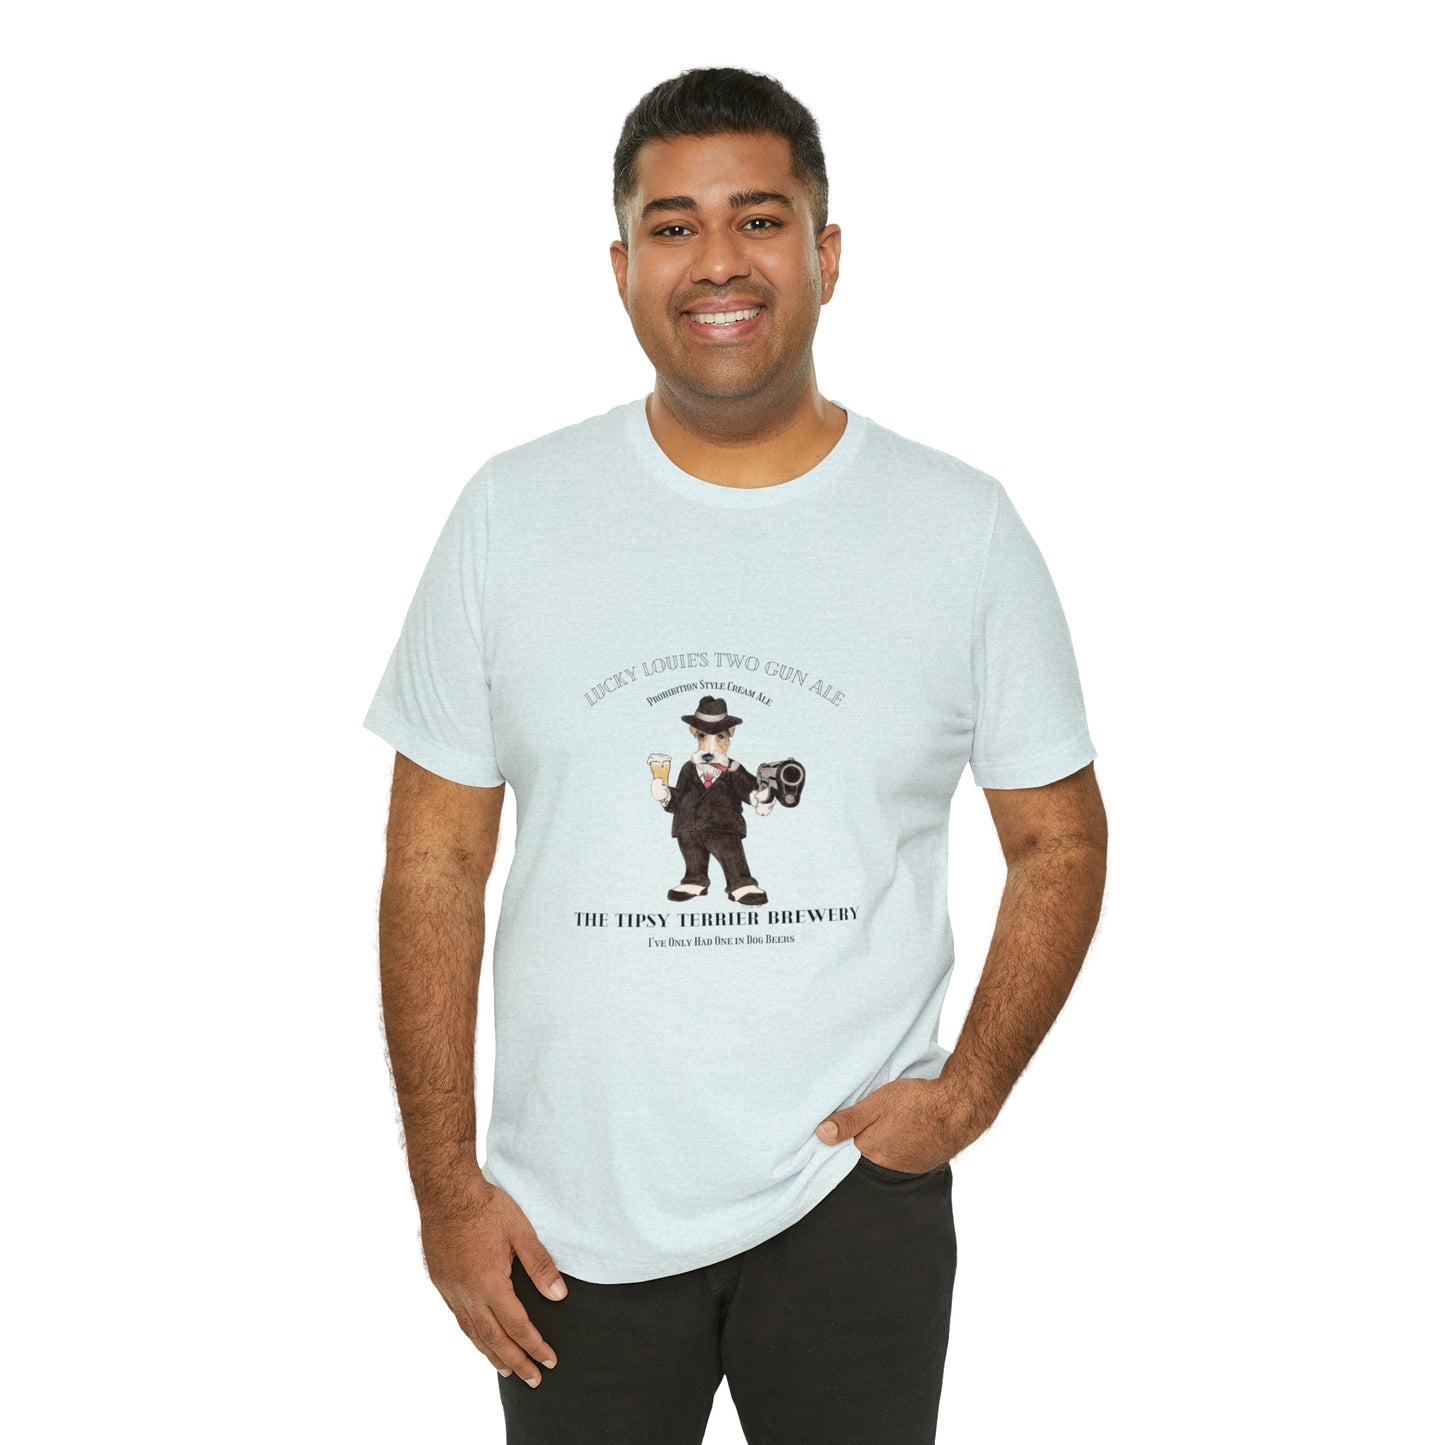 Tipsy Terrier Lucky Louie's Two Gun Ale T-Shirt